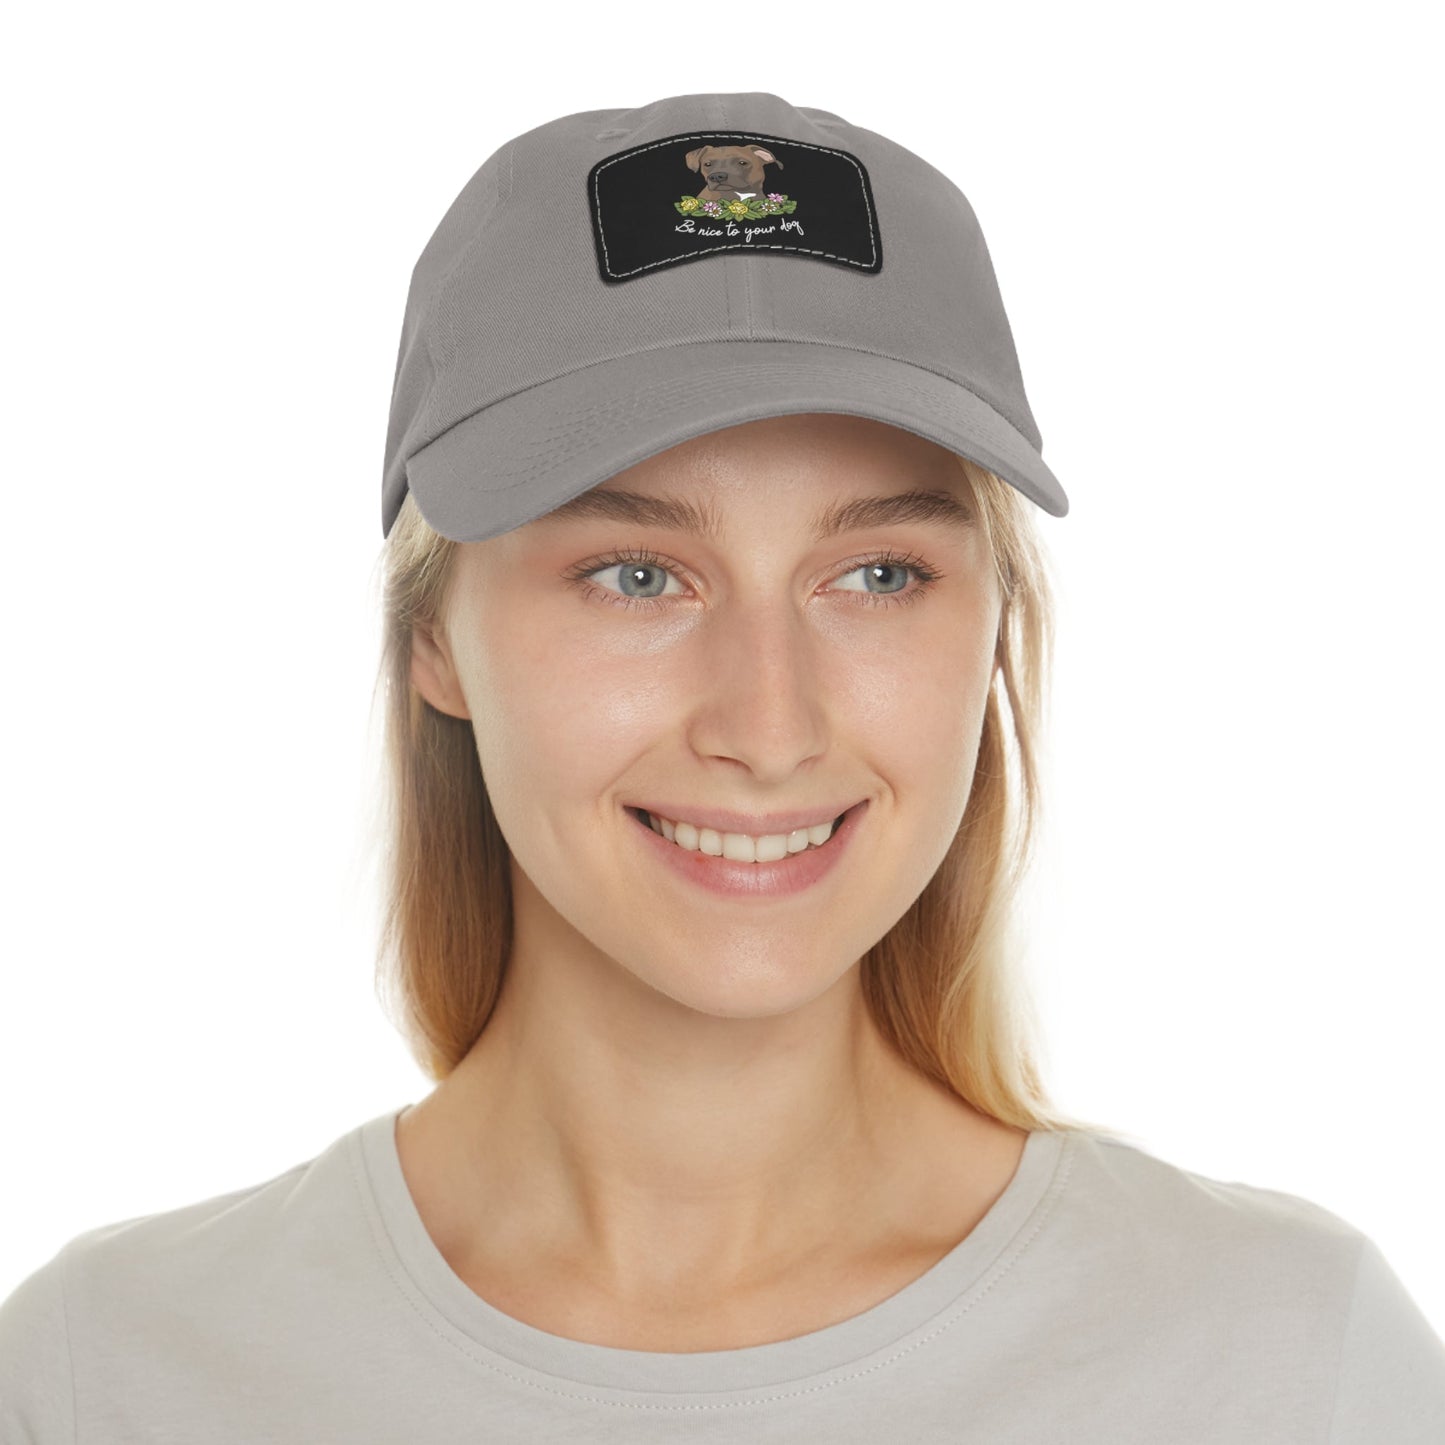 Be Nice to Your Dog | Dad Hat - Detezi Designs-28911590662539393568